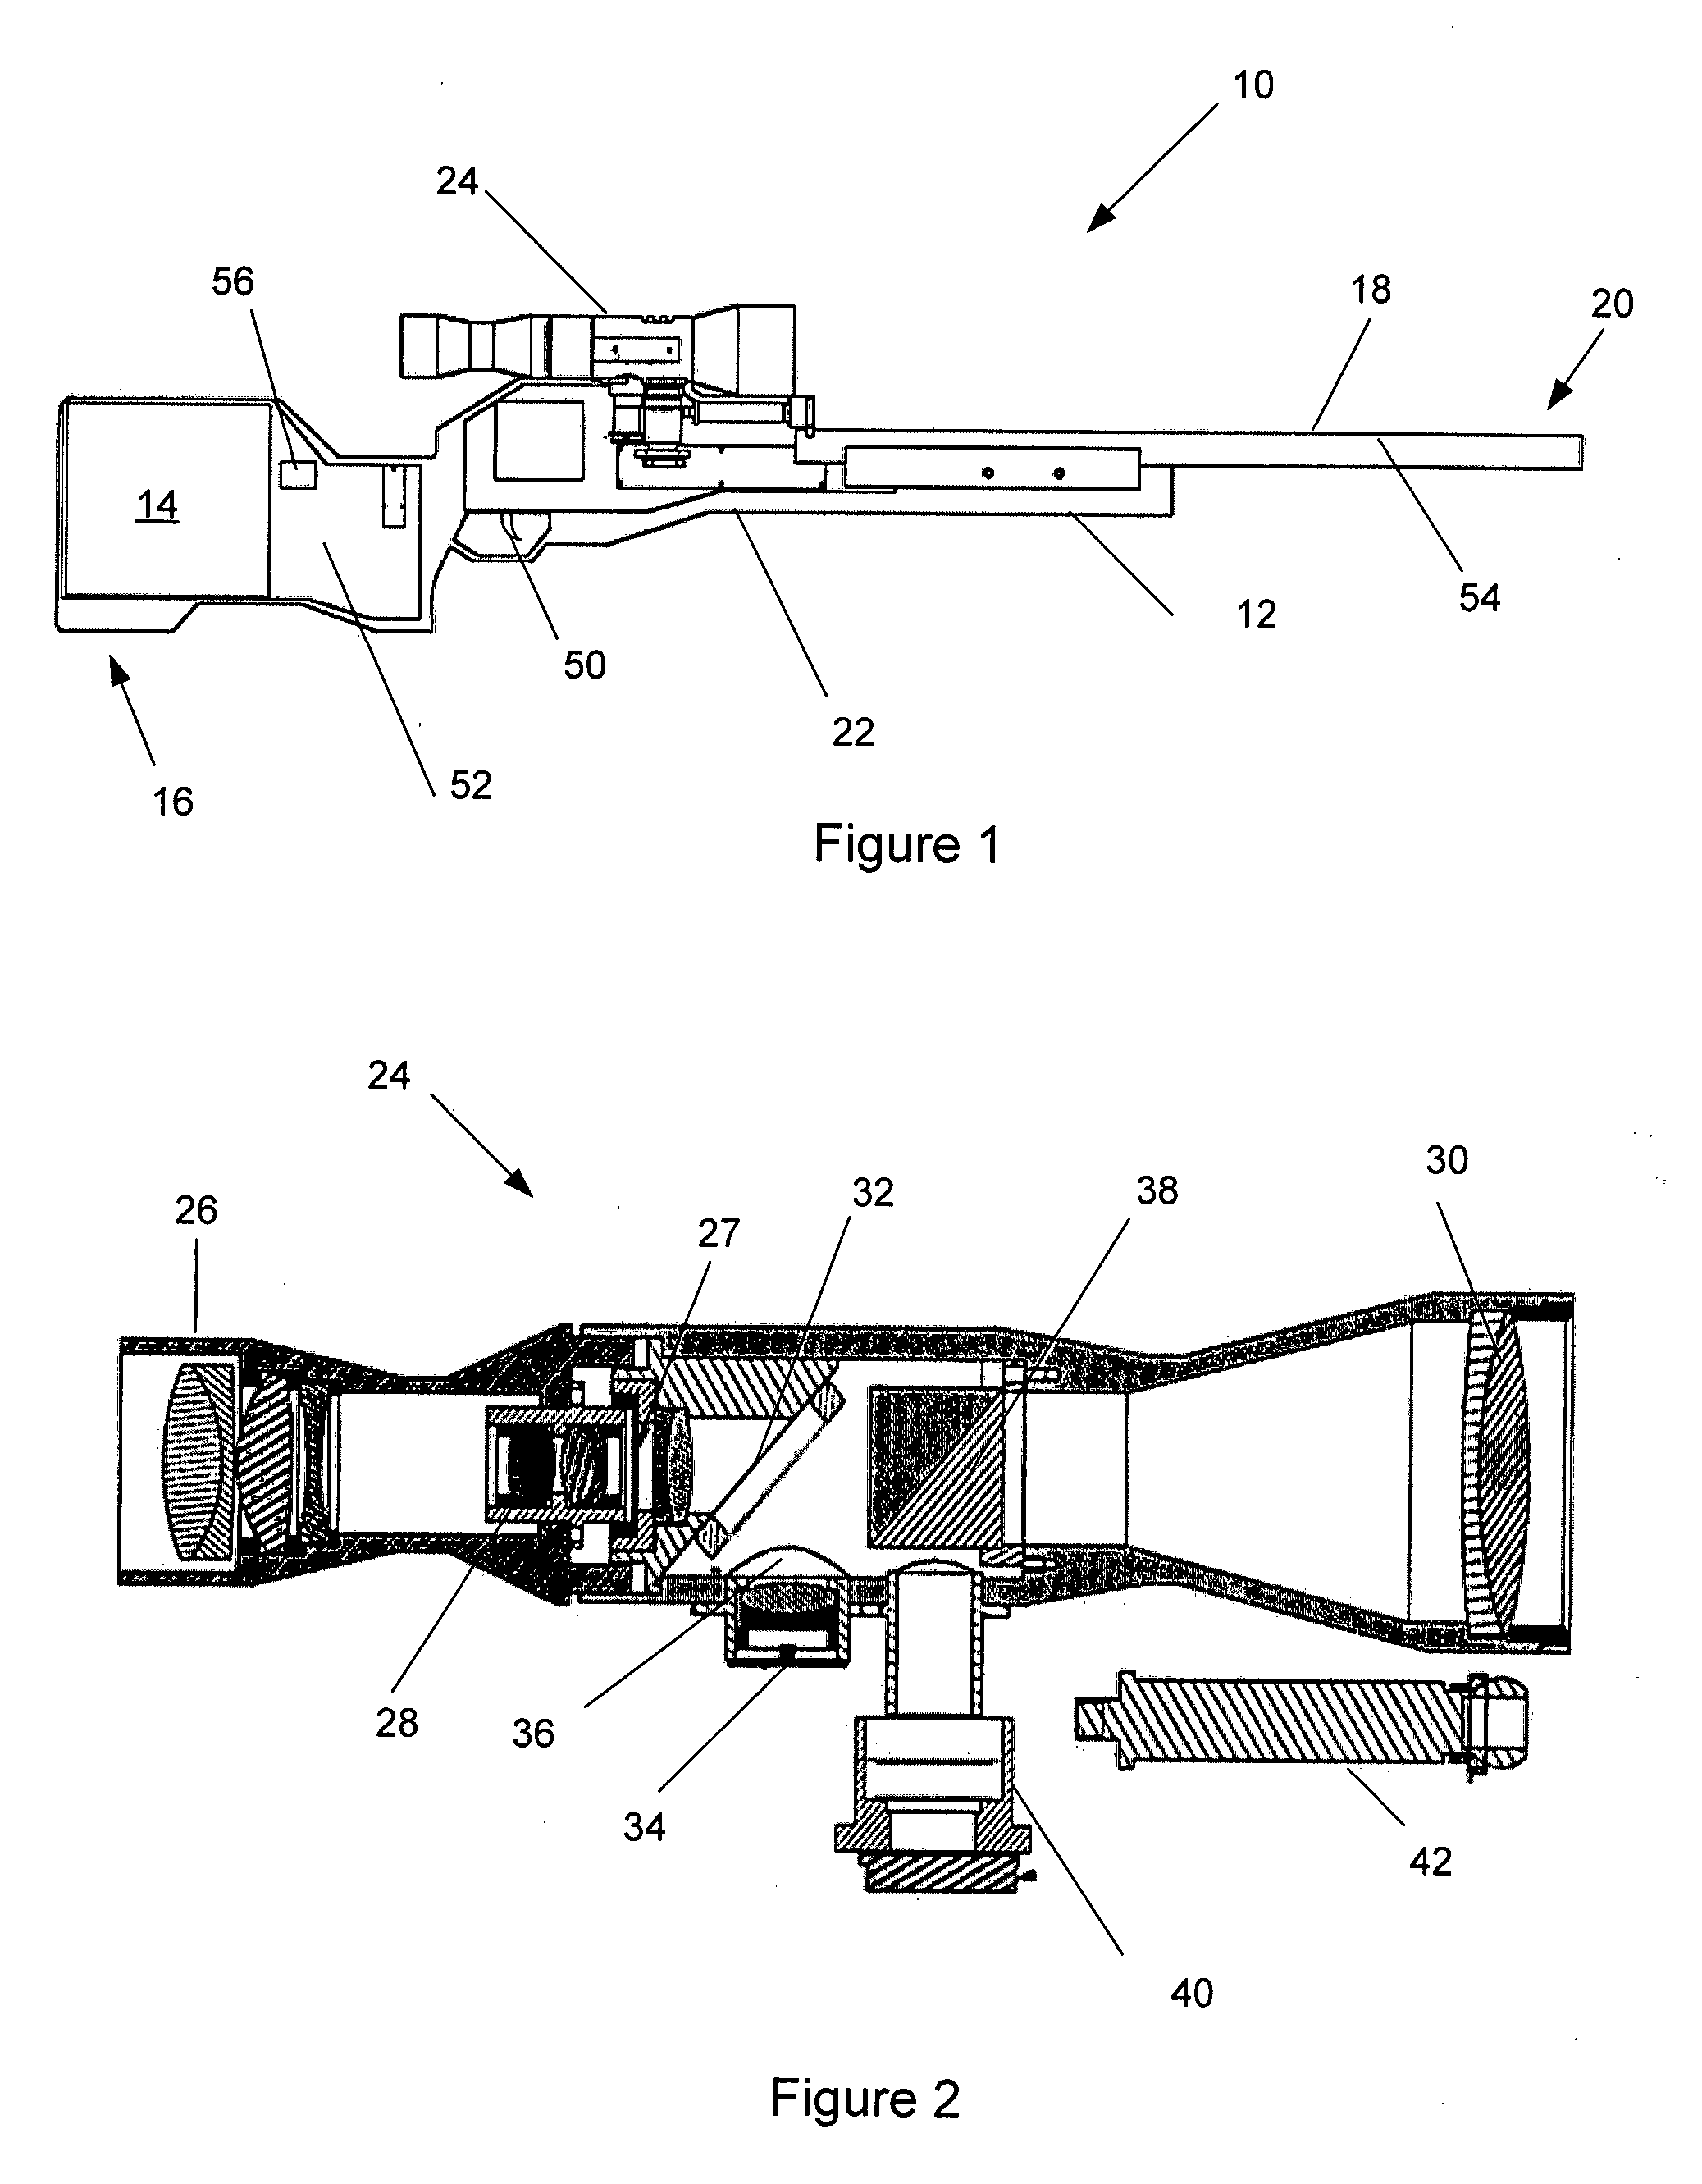 Simulated shooting device and system